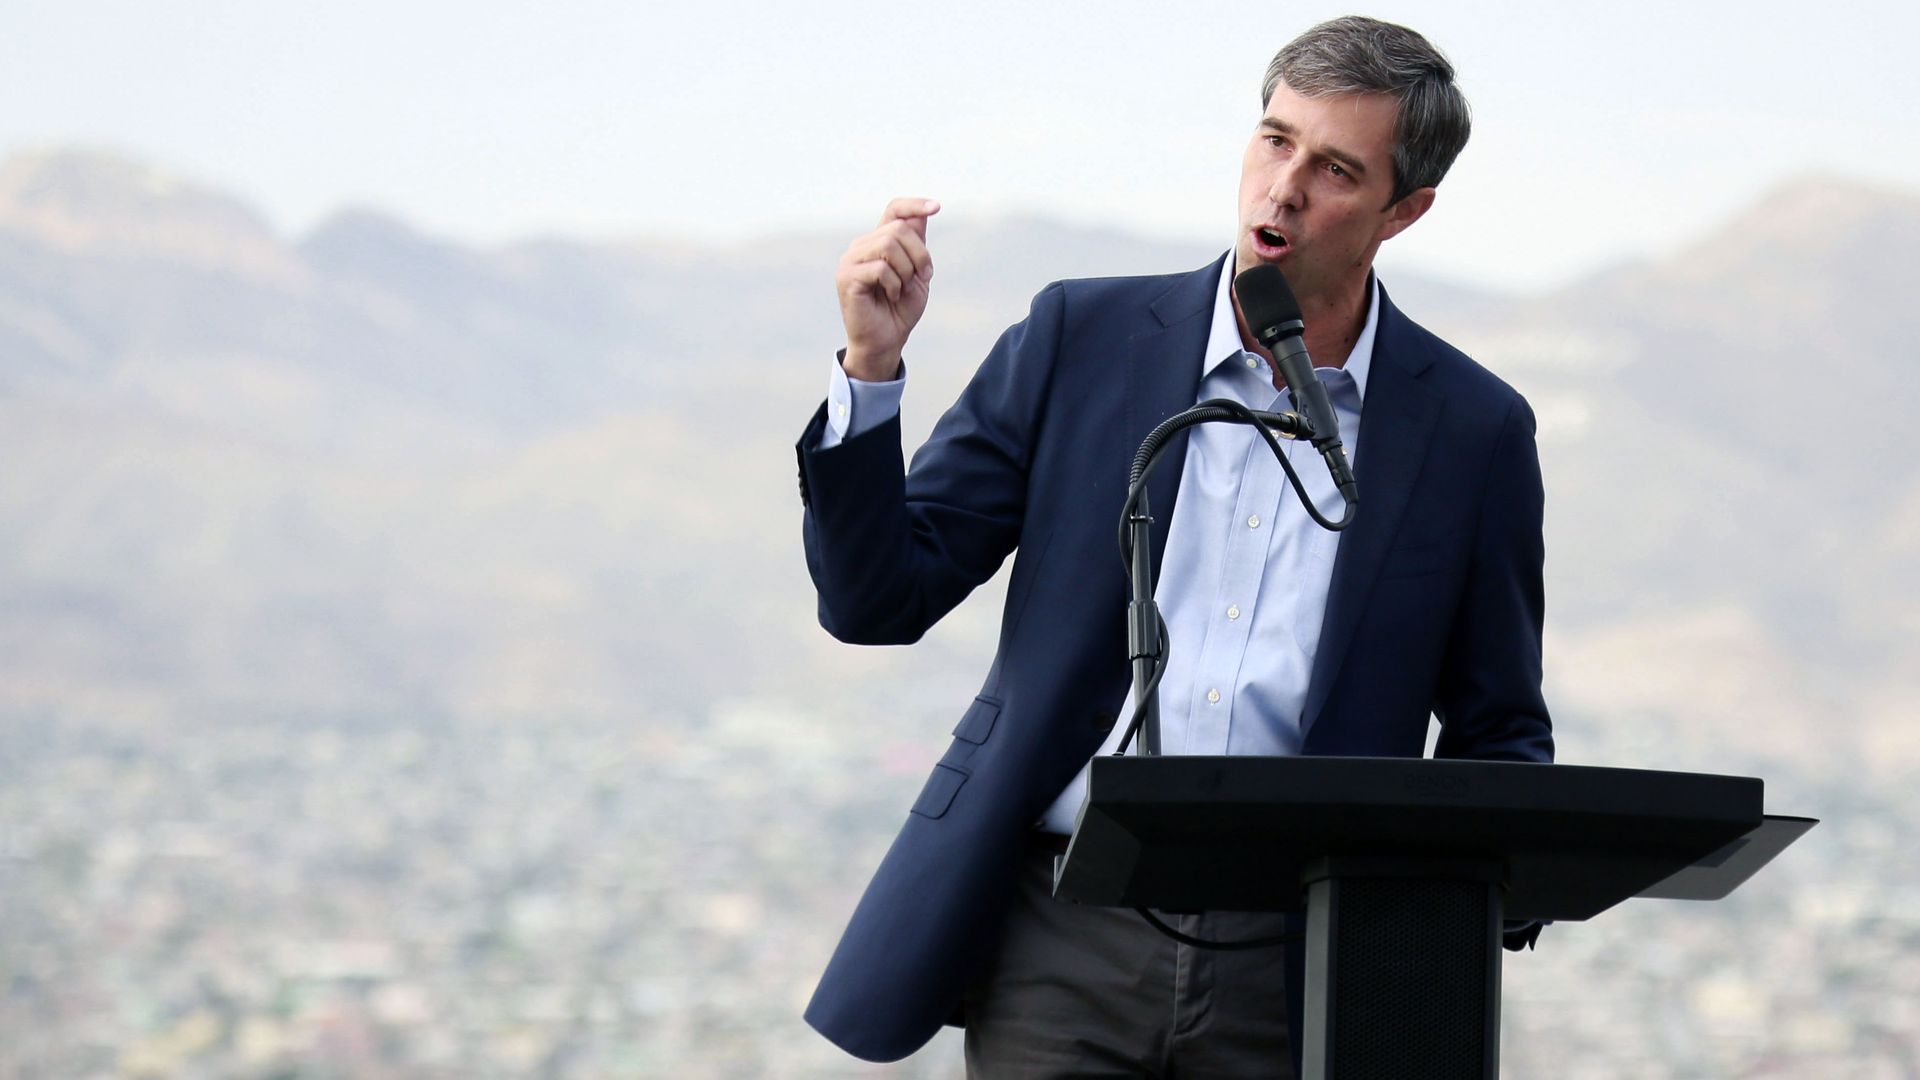 In this image, Beto stands at a podium outside and speaks to a crowd.